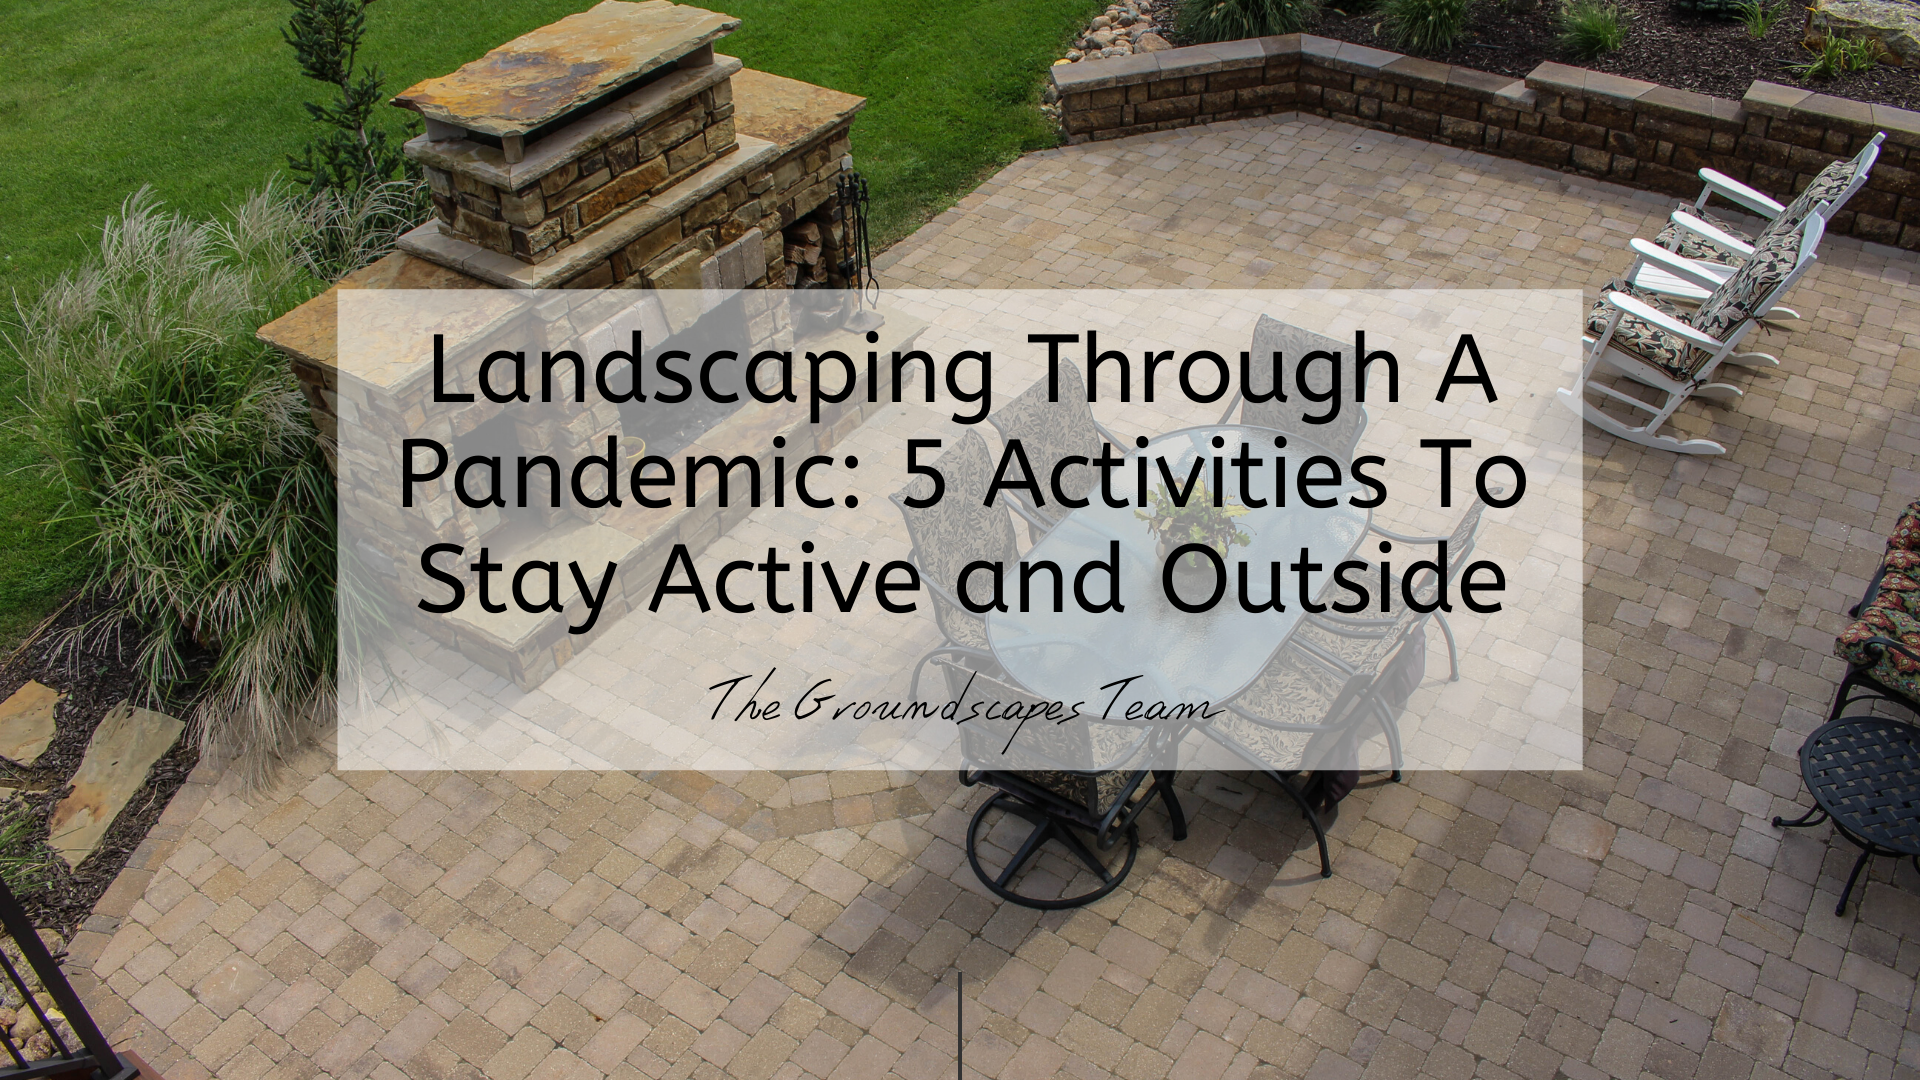 Landscaping Through A Pandemic: 5 Activities To Stay Active and Outside